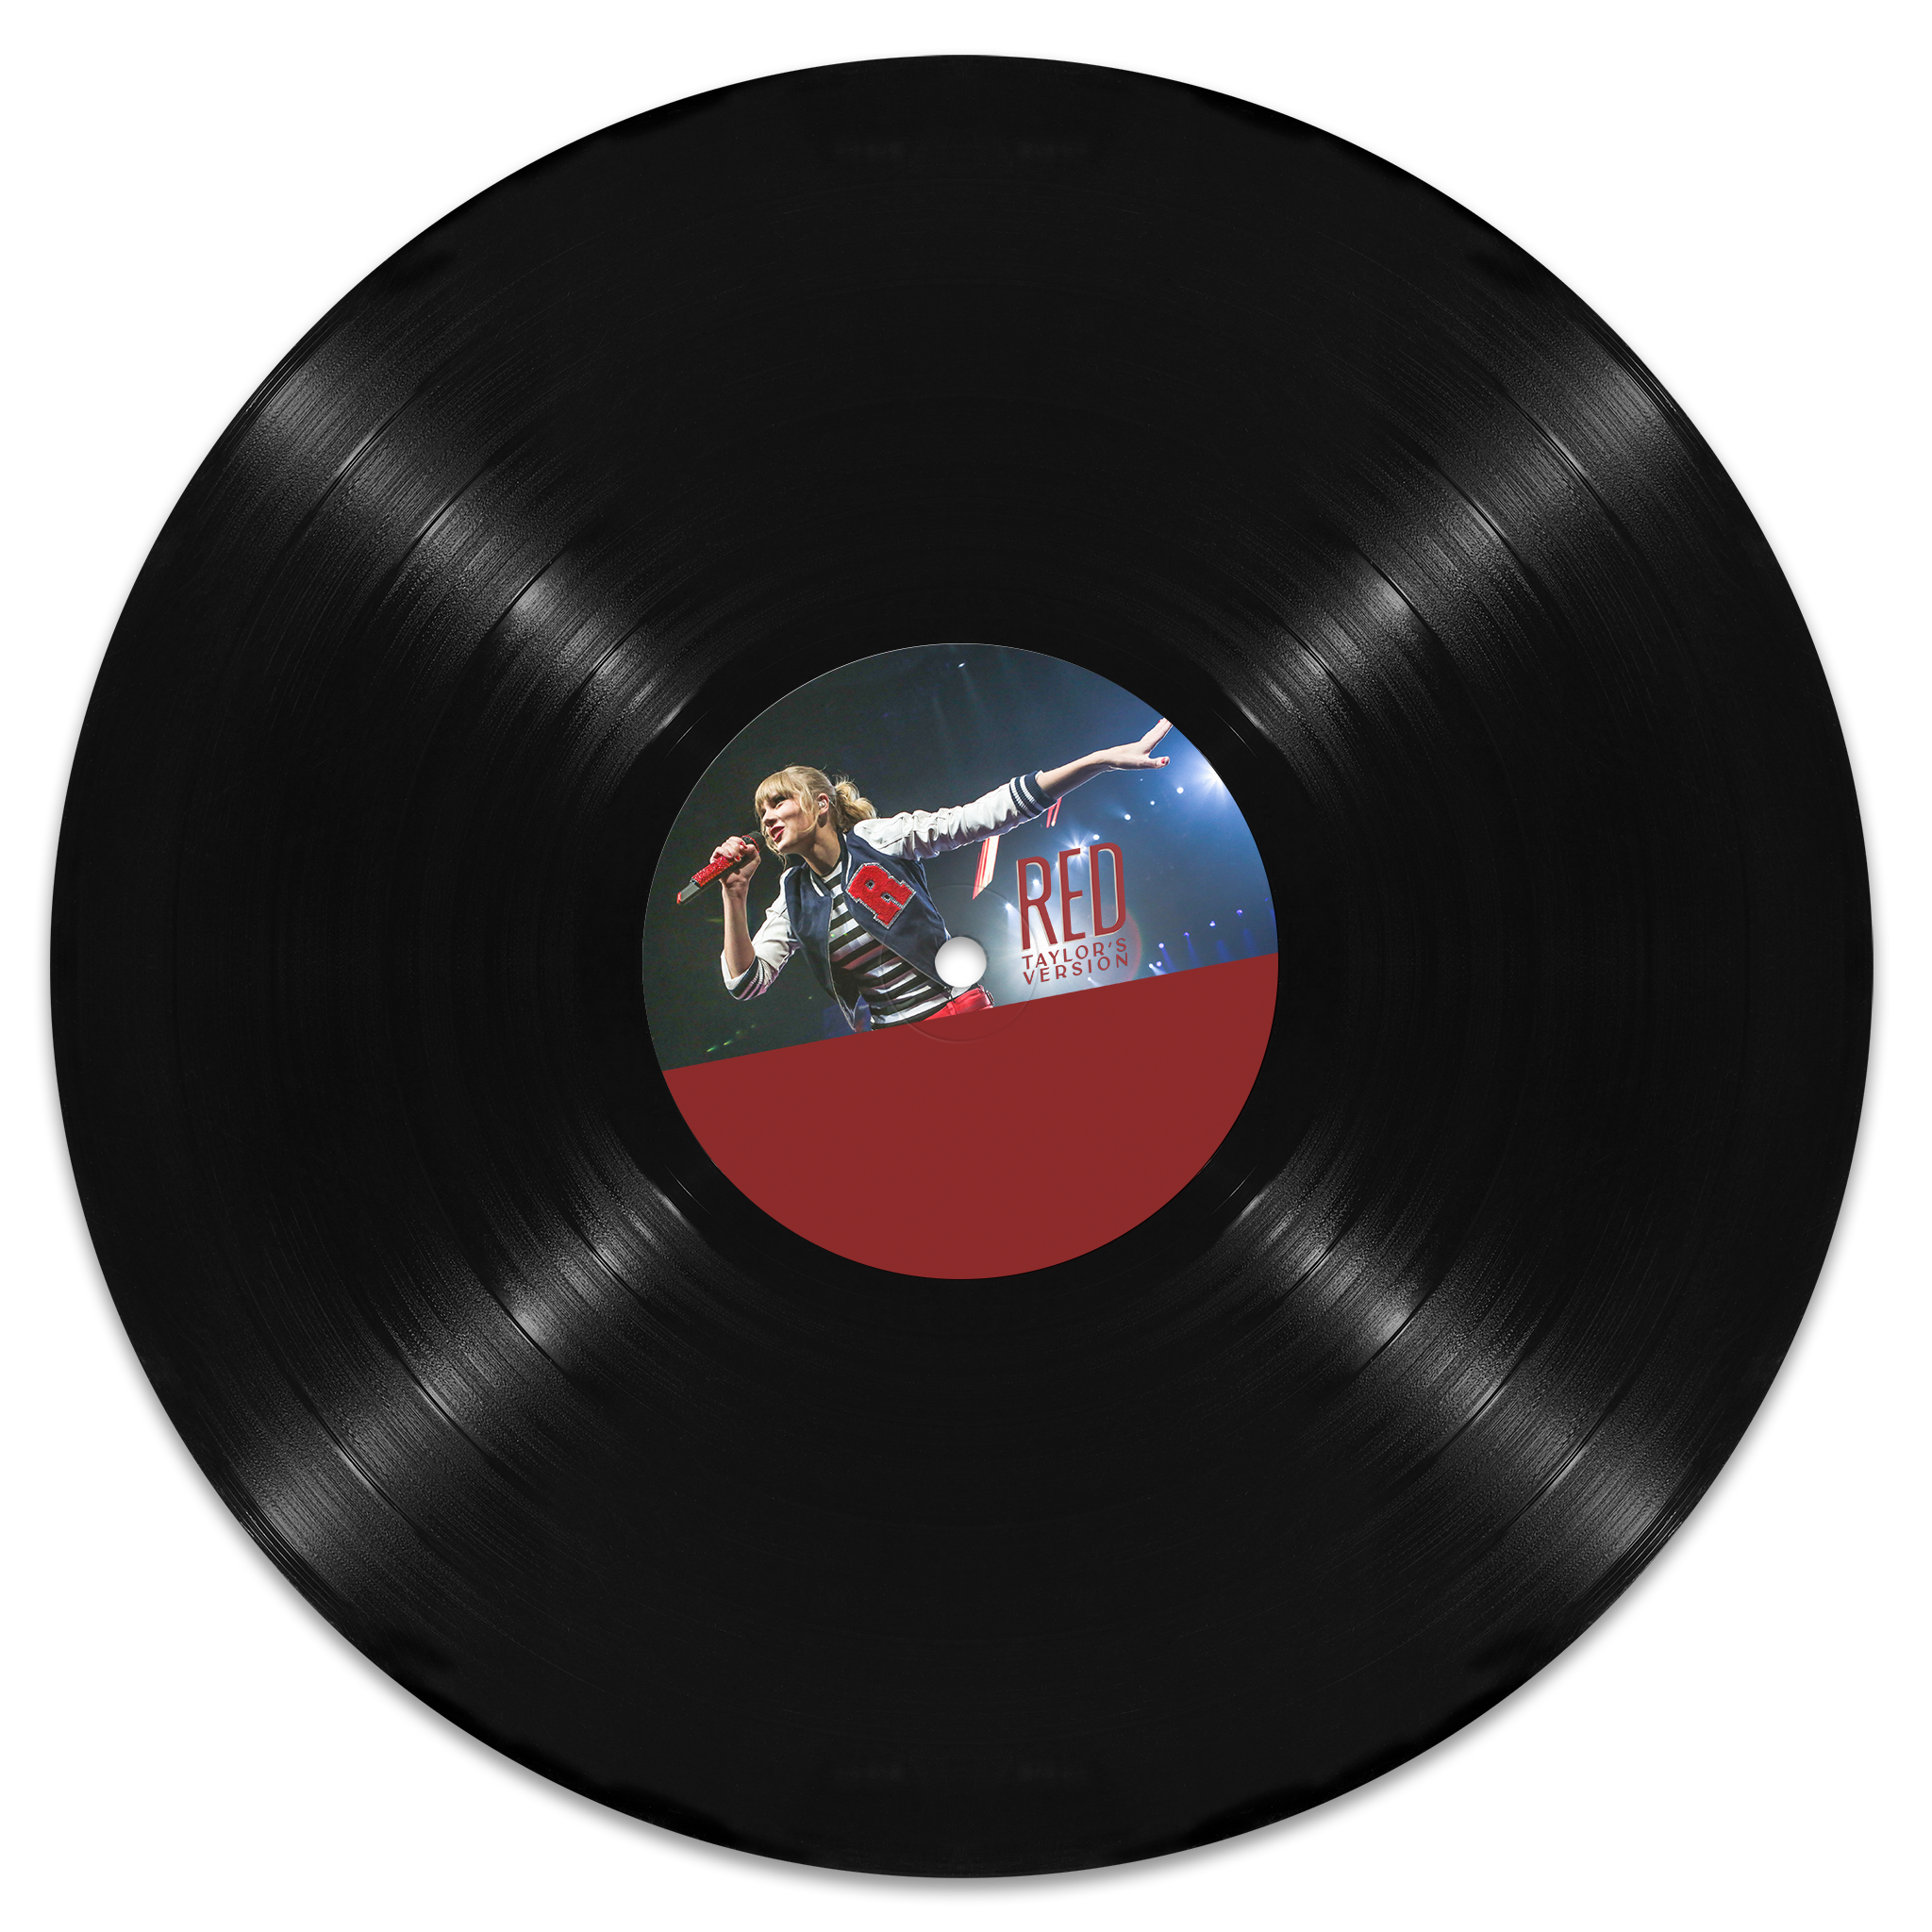 RED (Taylor's Version) Vinyl each vinyl album features: 30 songs, including 9 songs from the Vault with lyrics for all 30 songs, never before seen photos, artwork and handwritten lyrics for the 10 minute version of All Too Well.